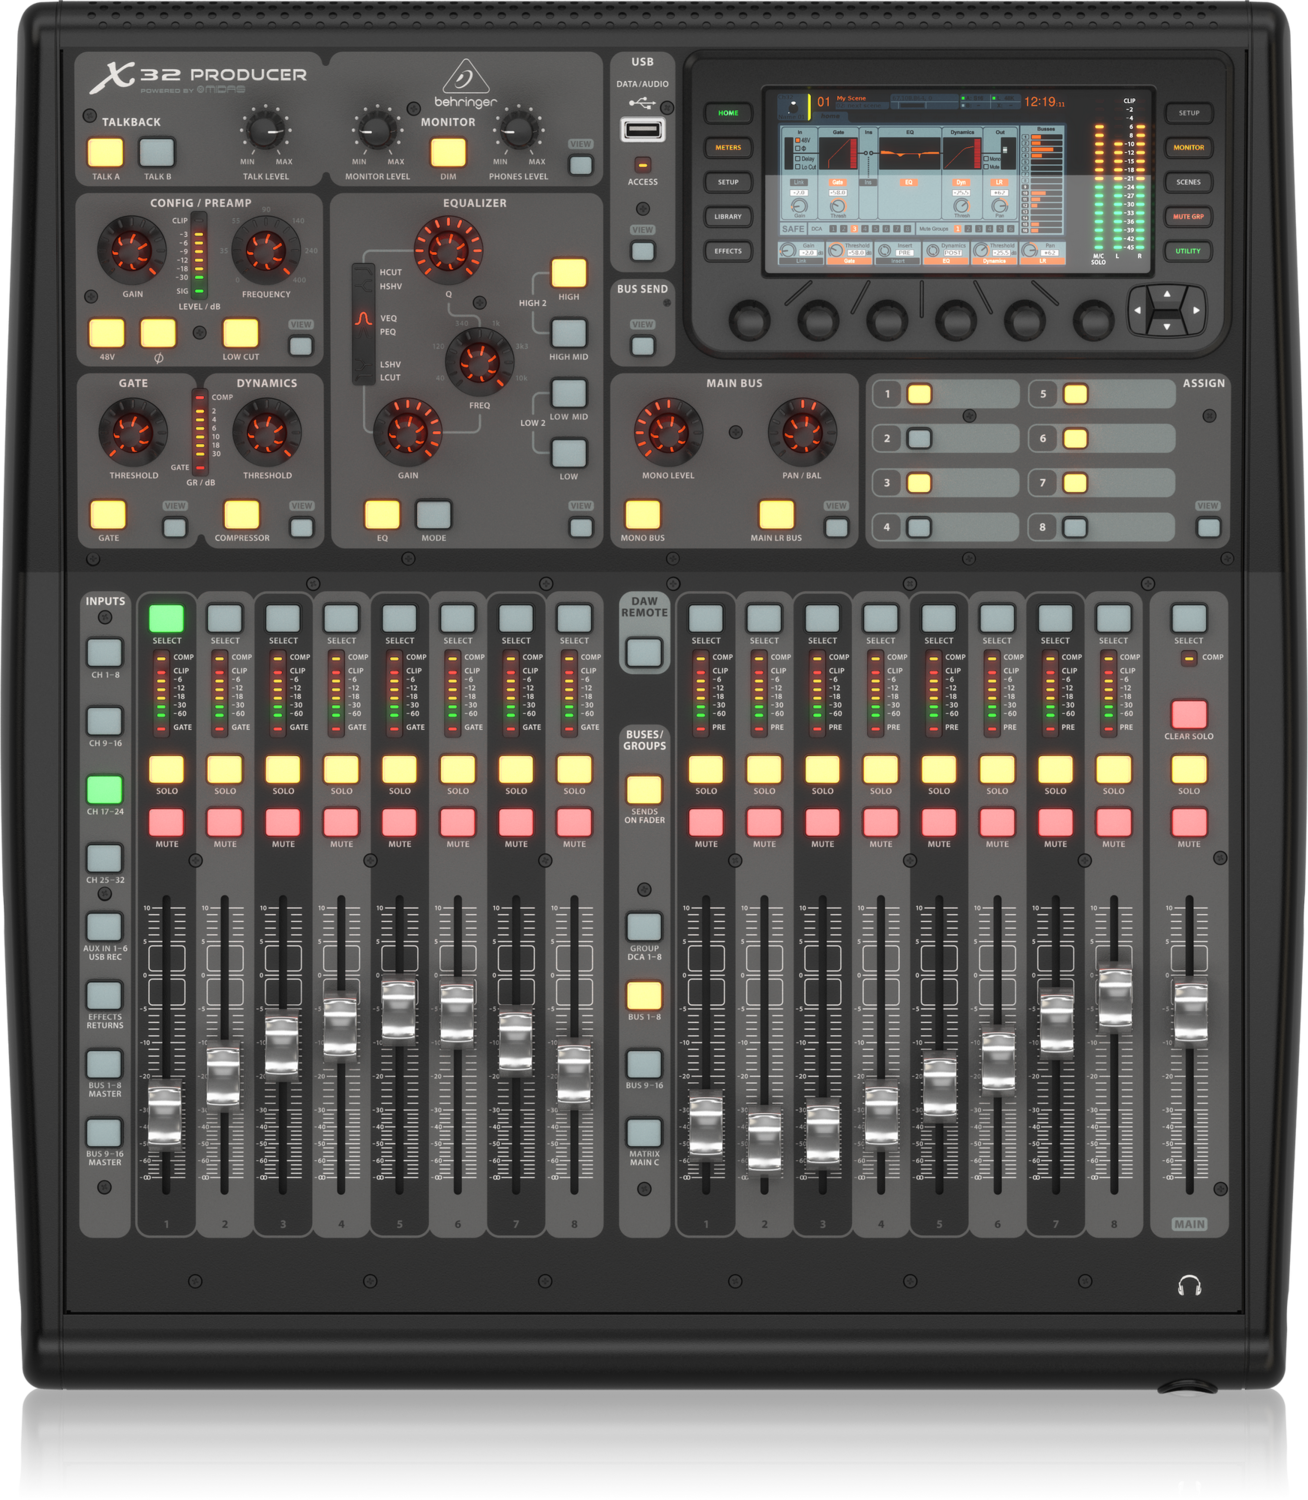 Behringer X32 Producer 40-Input, 25-Bus Digital Mixing Console with 16 Microphone Preamps